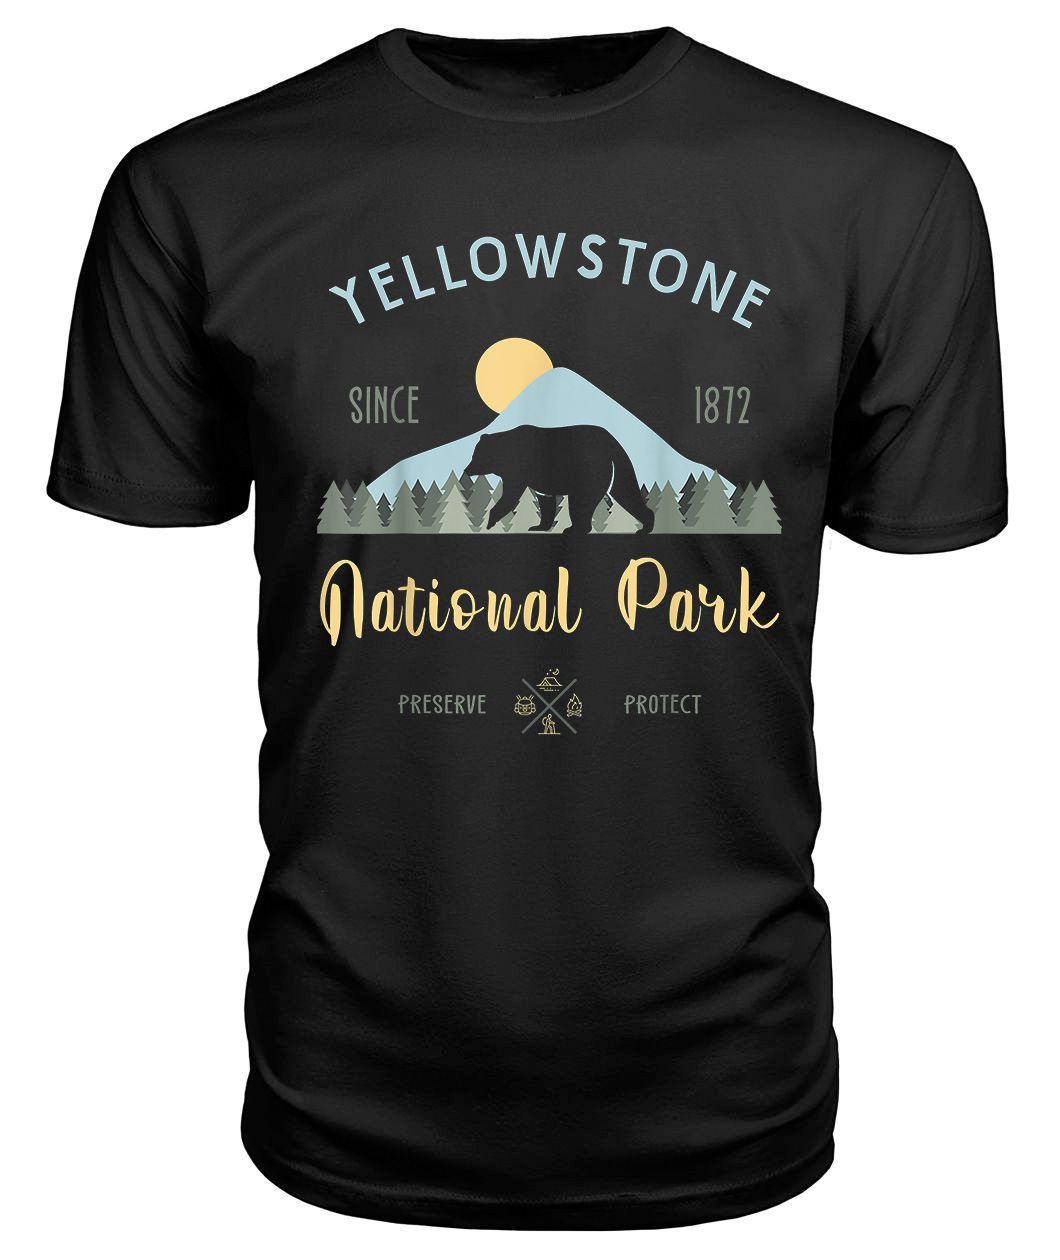 Outdoor National Park Tshirt Yellowstone National Park T-shirt Size Up To 5xl